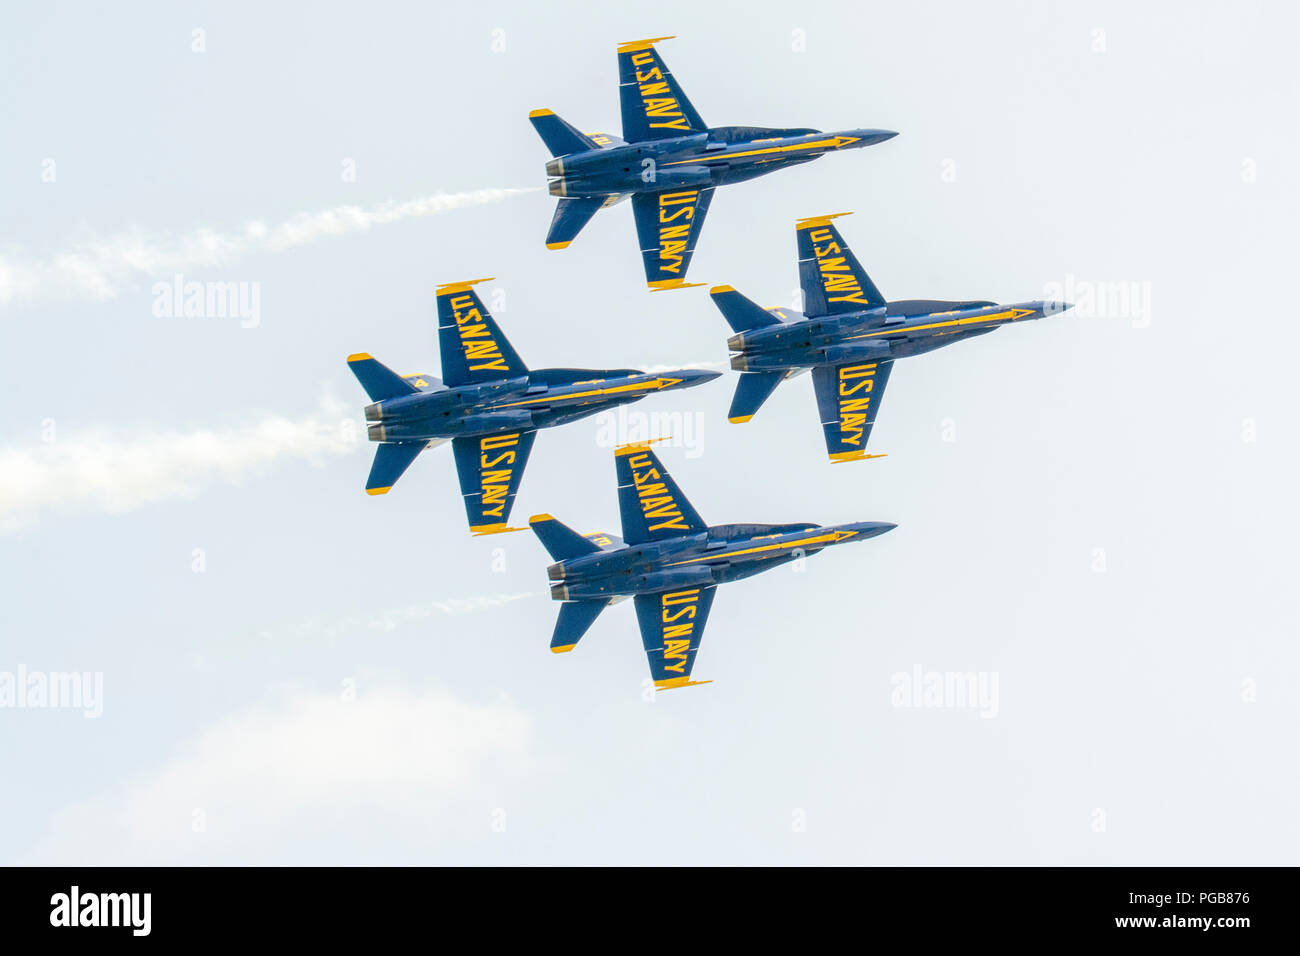 180818-N-RR095-534 TERRE HAUTE, Indiana. (August 18, 2018) The U.S. Navy Flight Demonstration Squadron, the Blue Angels, Diamond pilots soar over the crowd at the 2018 Terre Haute Air Show. The Blue Angels are scheduled to perform more than 60 demonstrations at more than 30 locations across the U.S. and Canada in 2018. (U.S. Navy photo by Mass Communication Specialist 1st Stephen D. Doyle II/Released) Stock Photo